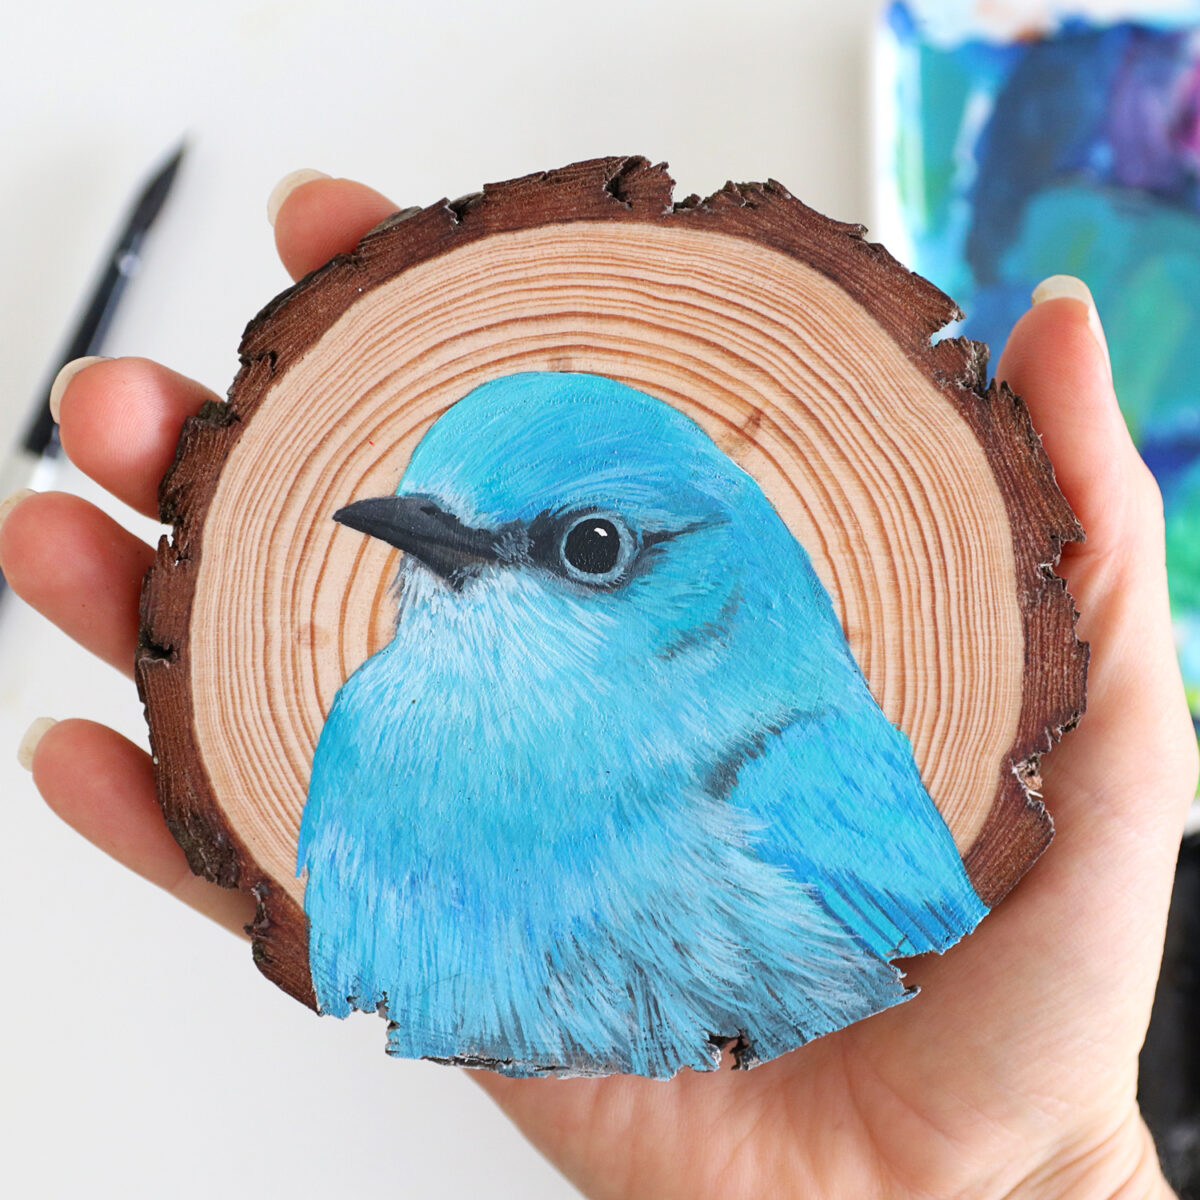 100 Days Of Birds A Marvelous Series Of Gouache On Wood Paintings By Deanna Maree (24)